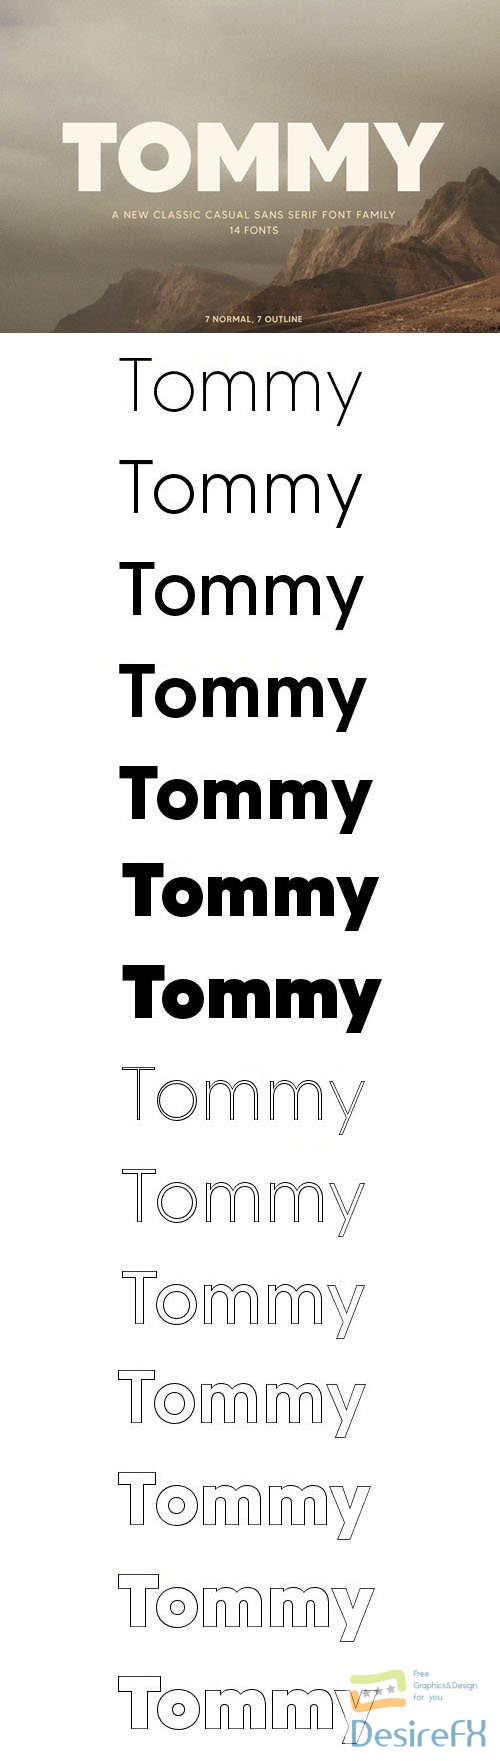 MADE Tommy - A New Classic Casual Sans Serif Font Fanily 14-Weights